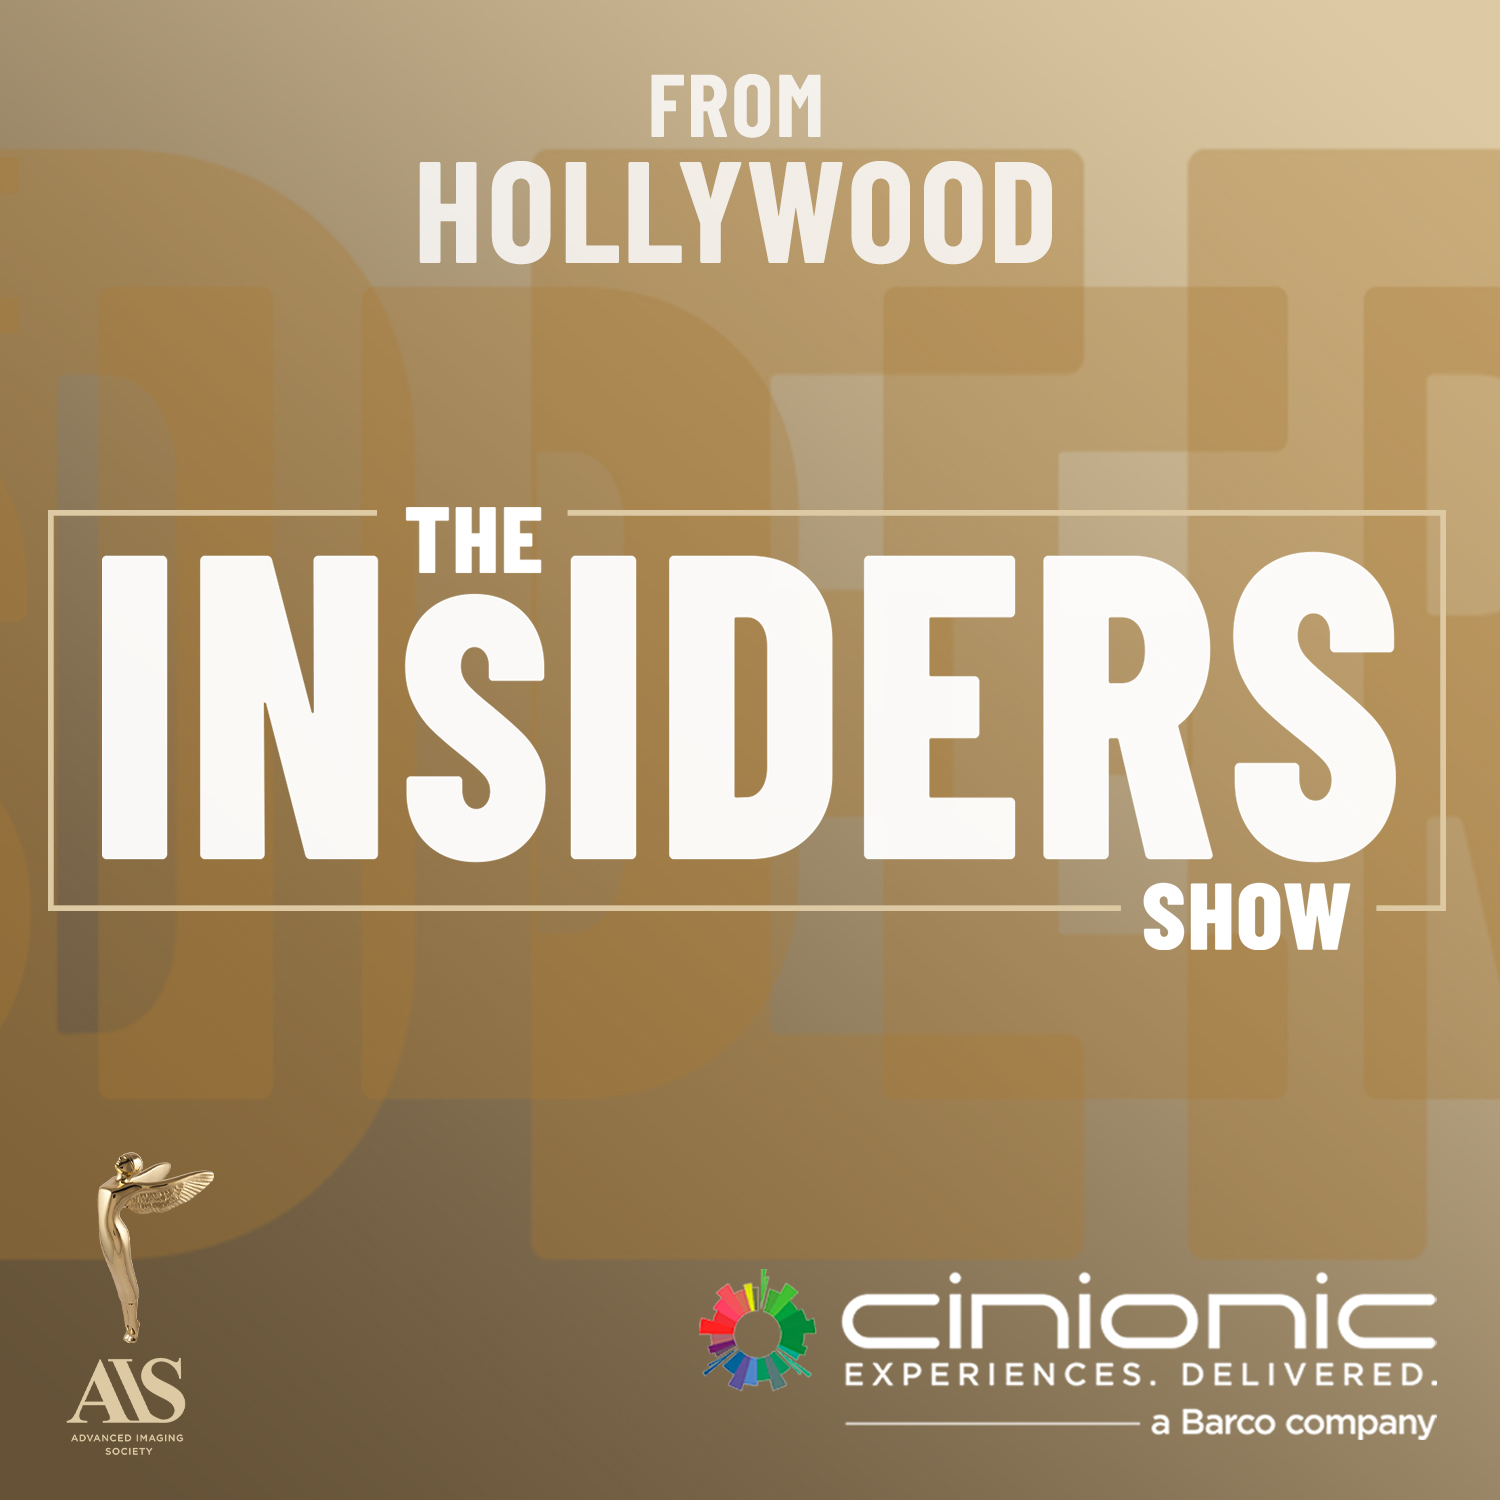 Artwork for The Insiders Show